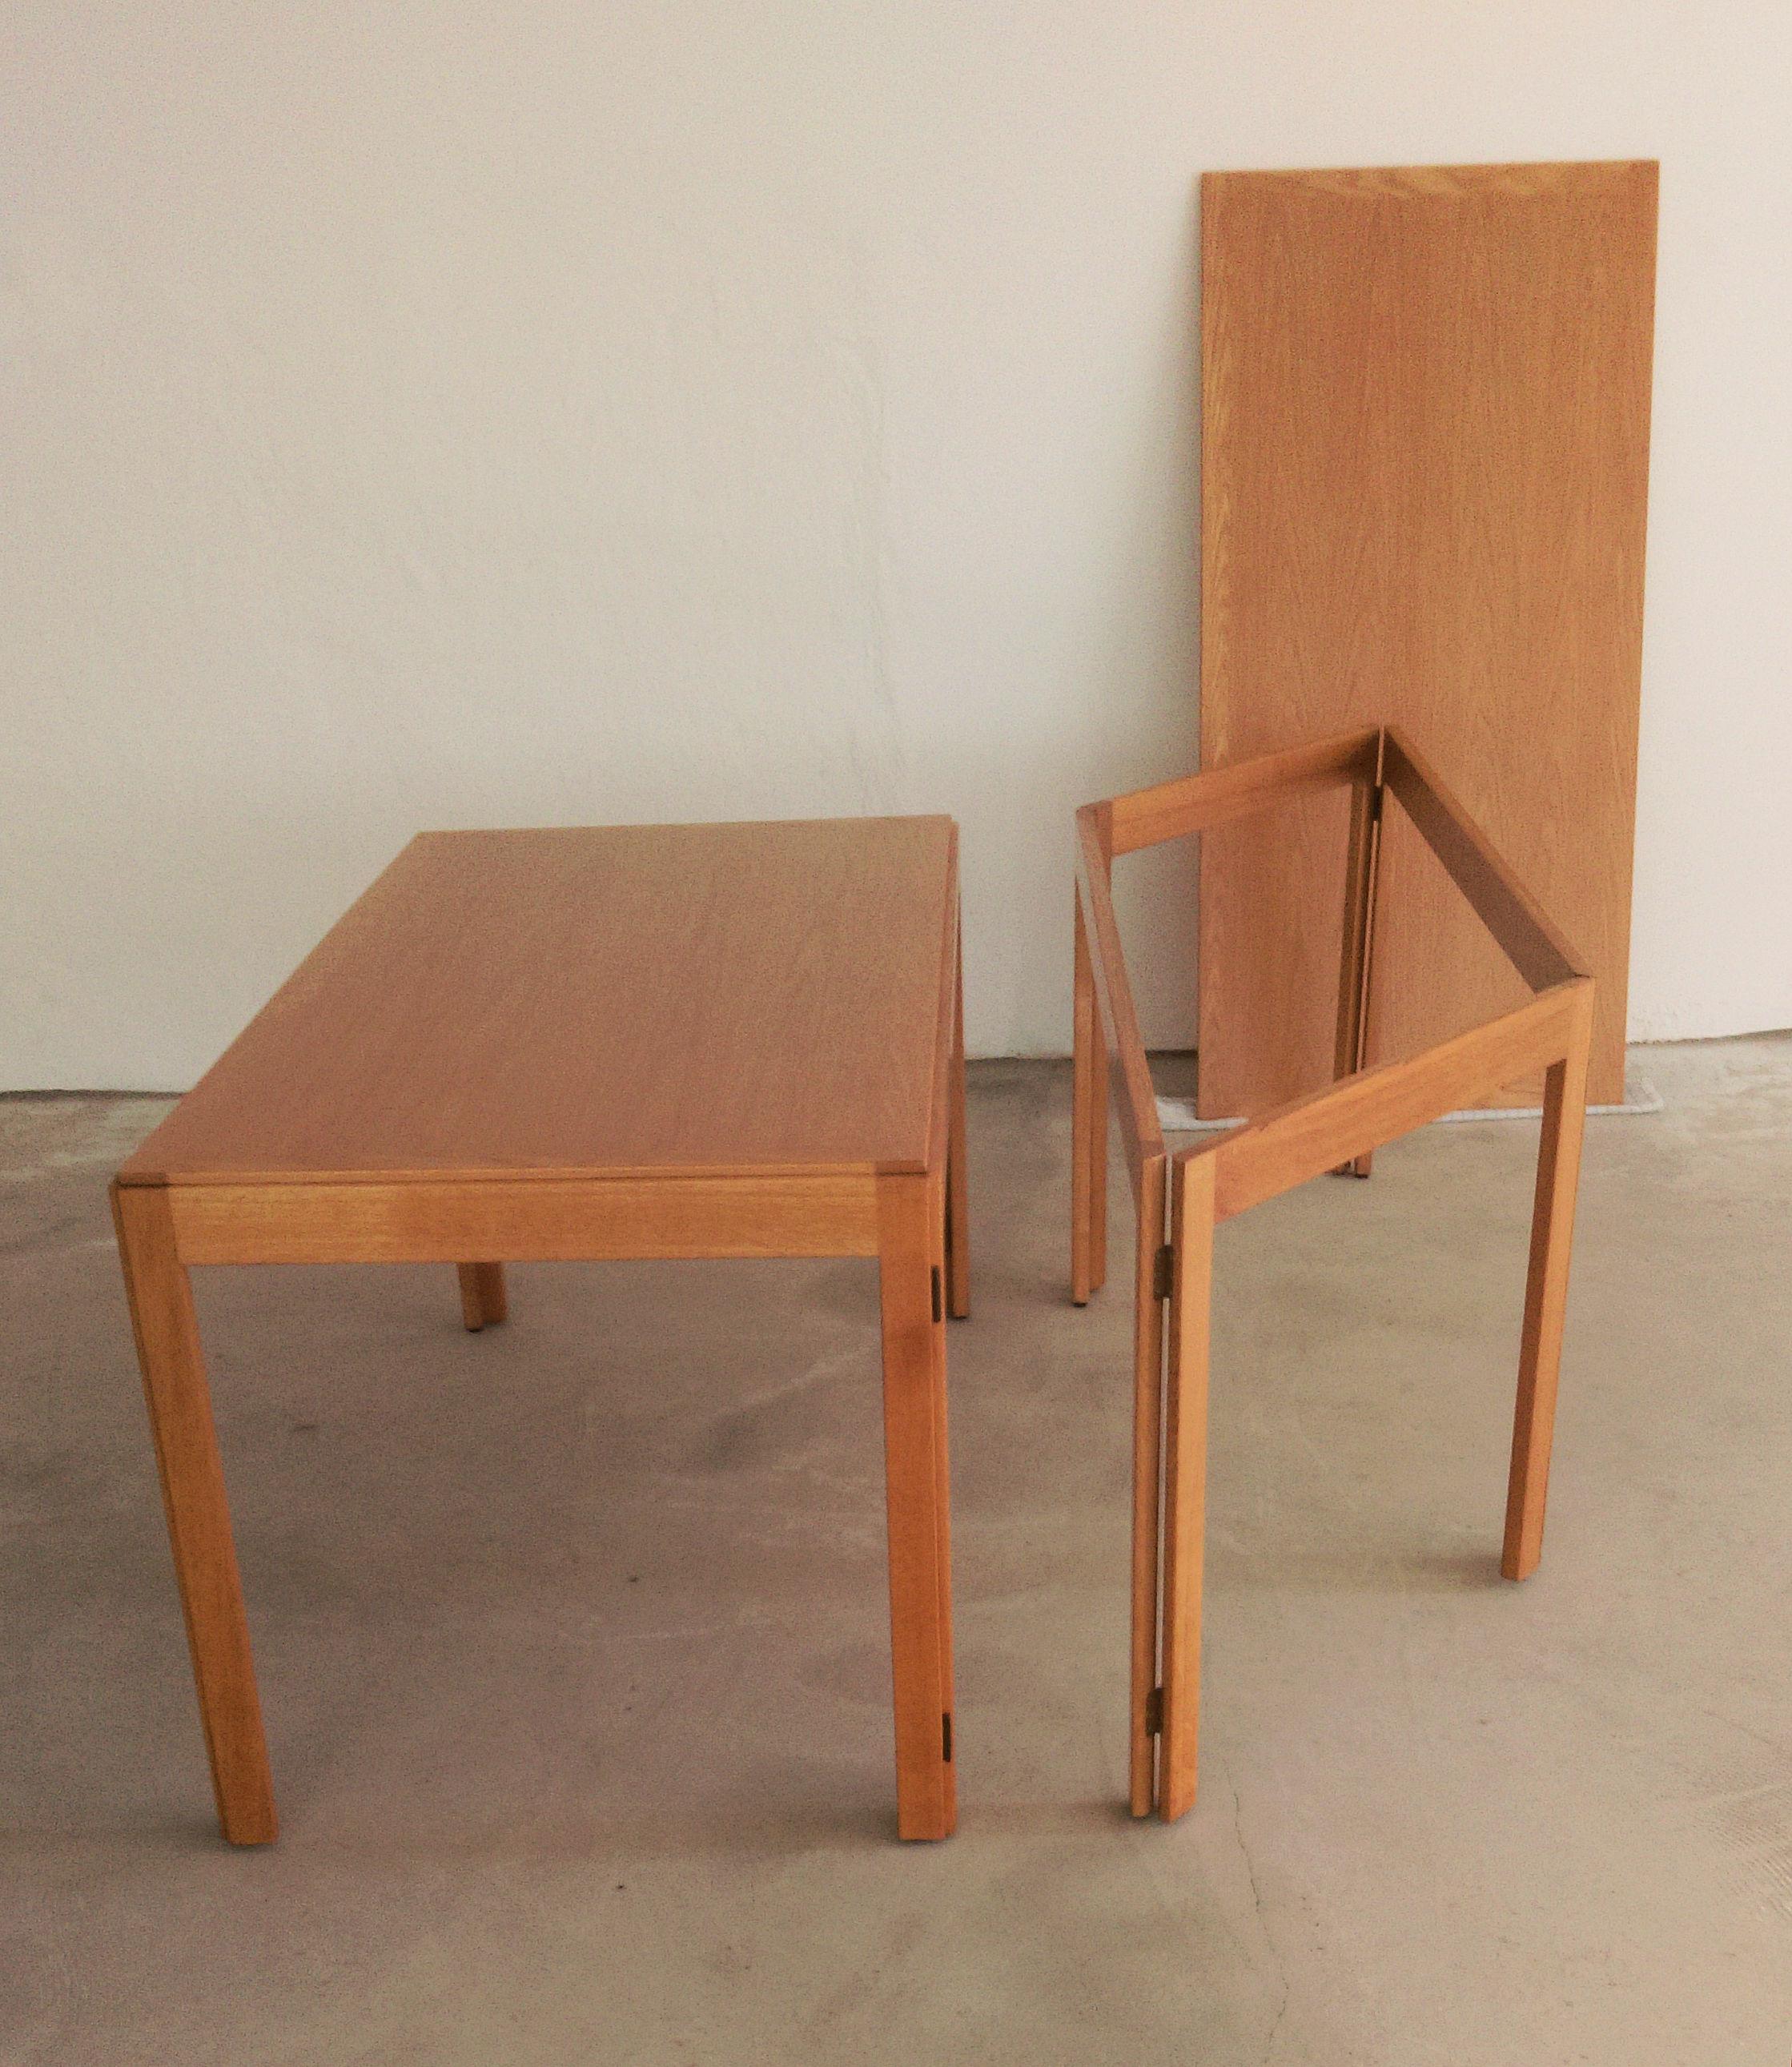 1970s Borge Mogensen Refinished Folding Conference / Dining Tables in Oak For Sale 5